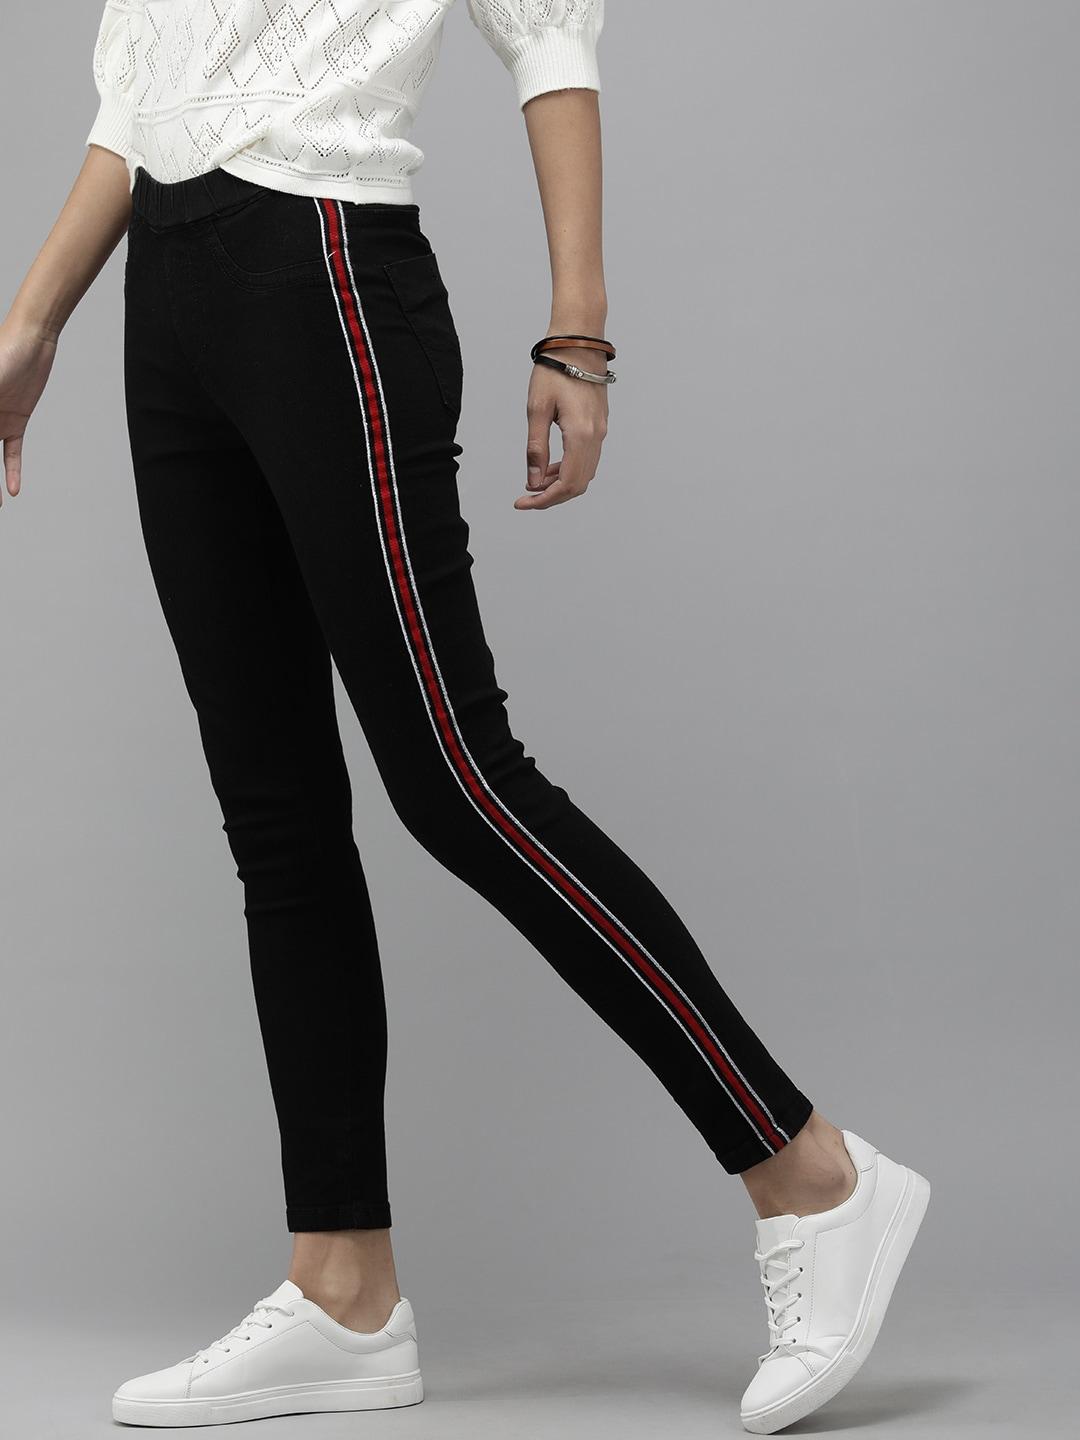 roadster-women-black-&-red-side-taped-ankle-length-skinny-fit-jeggings